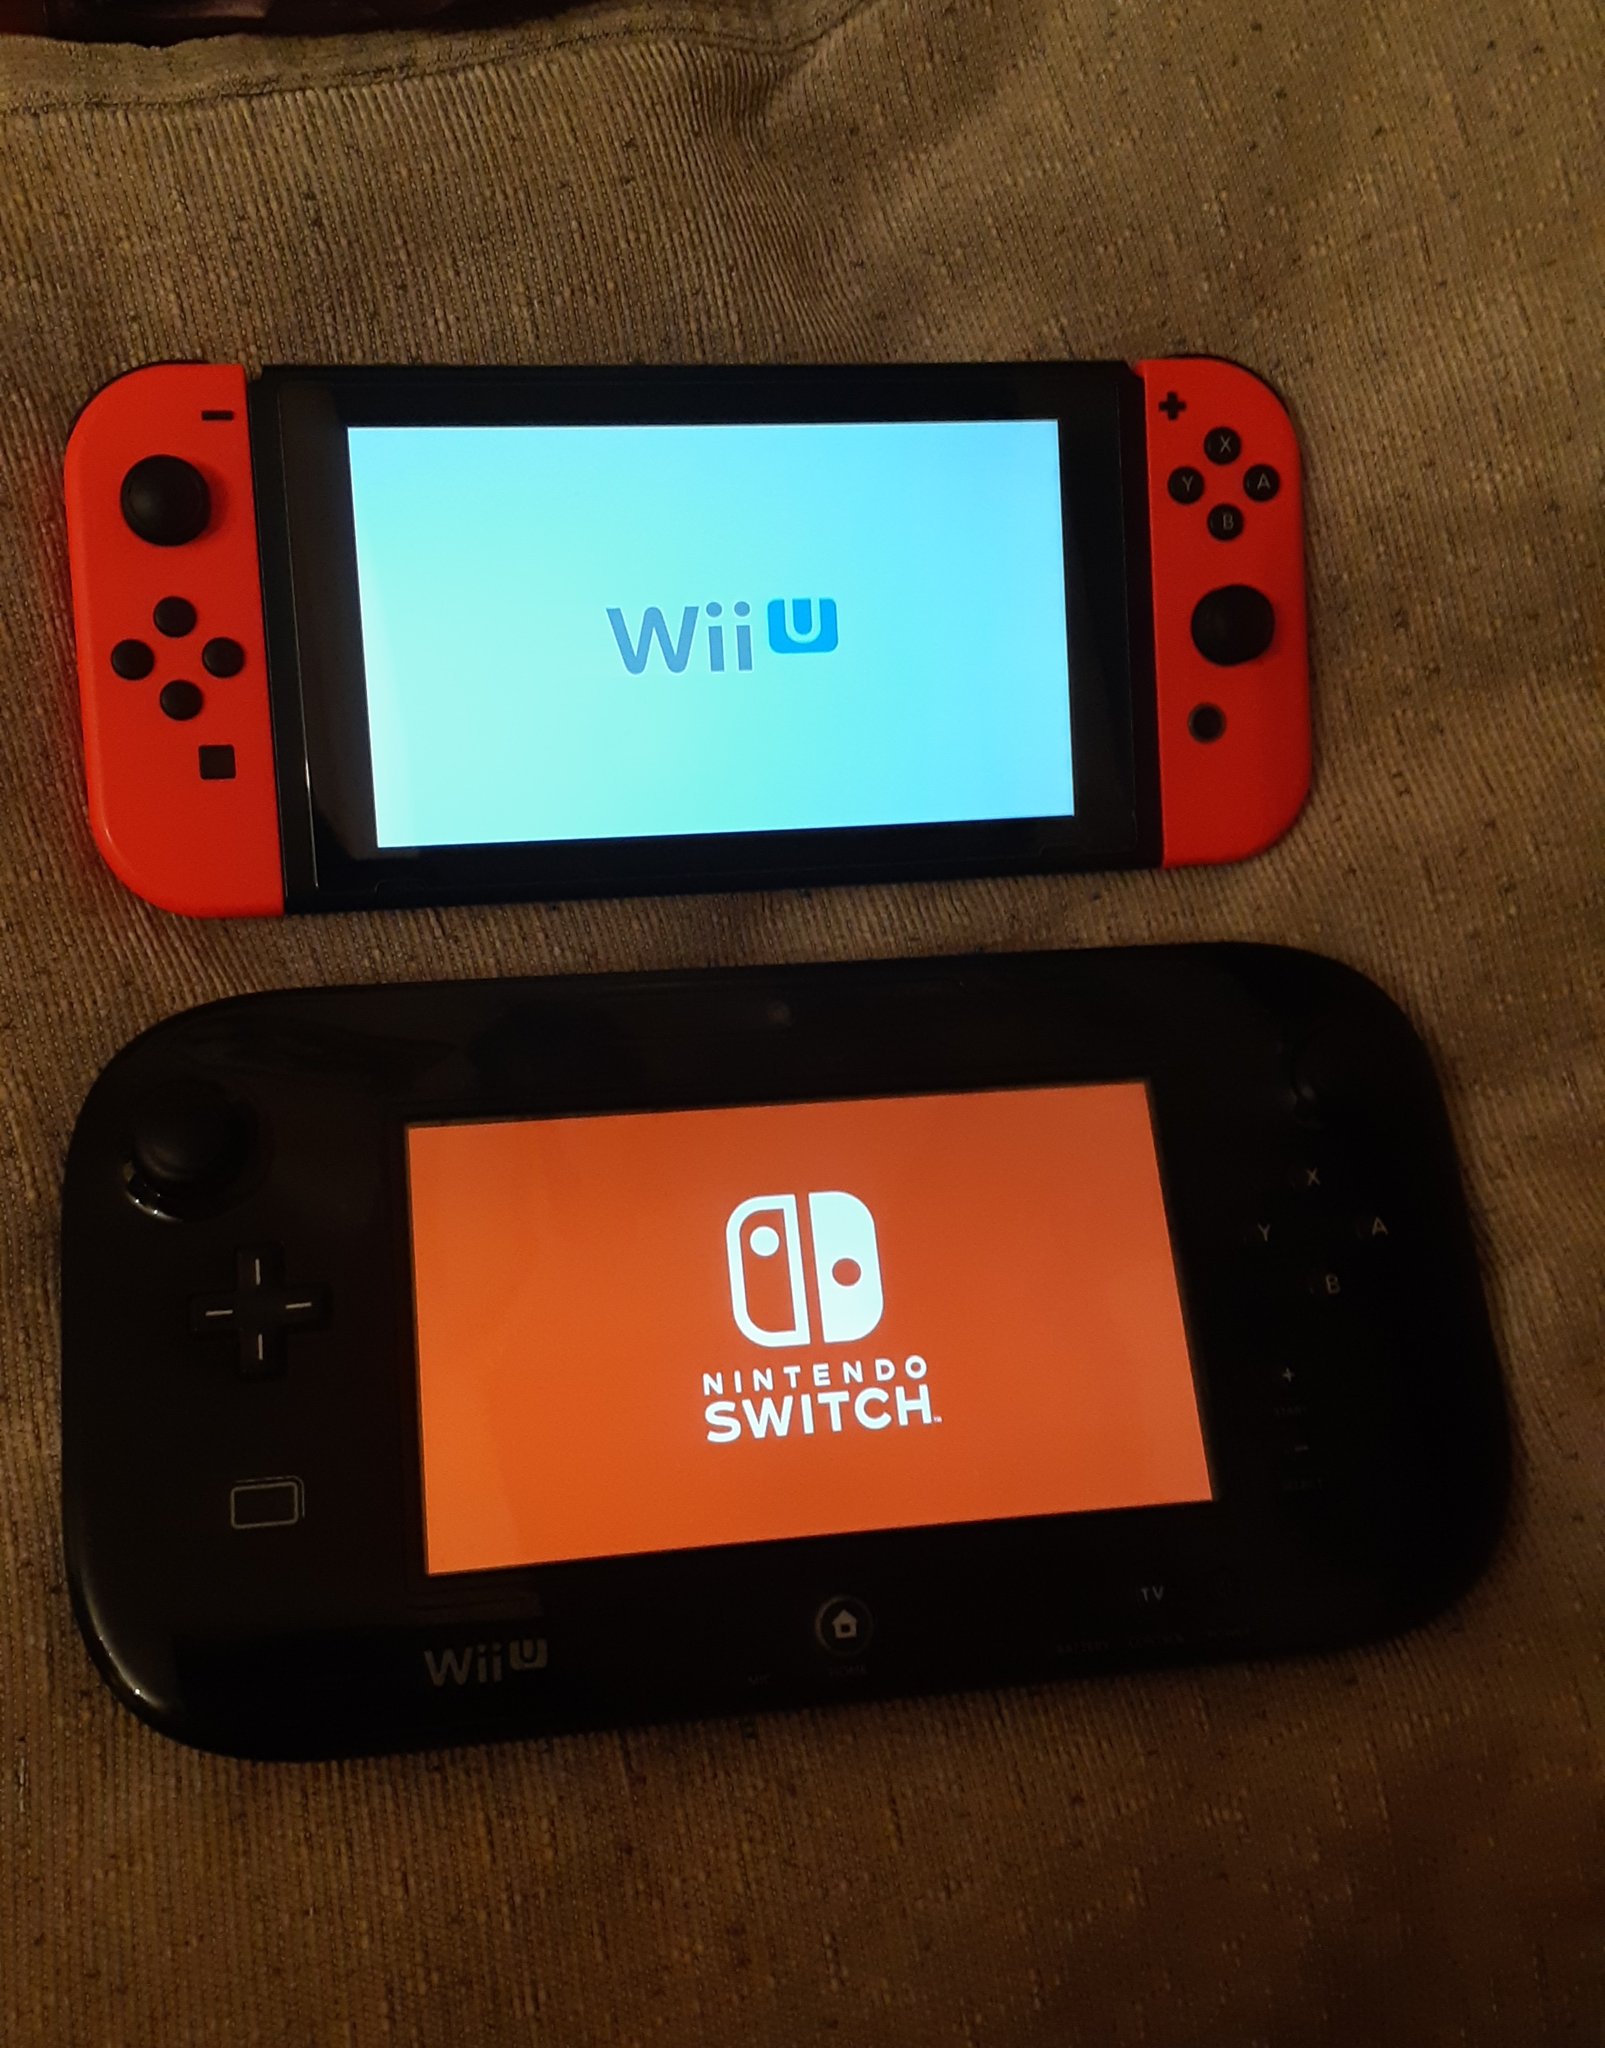 difference between switch and wii u